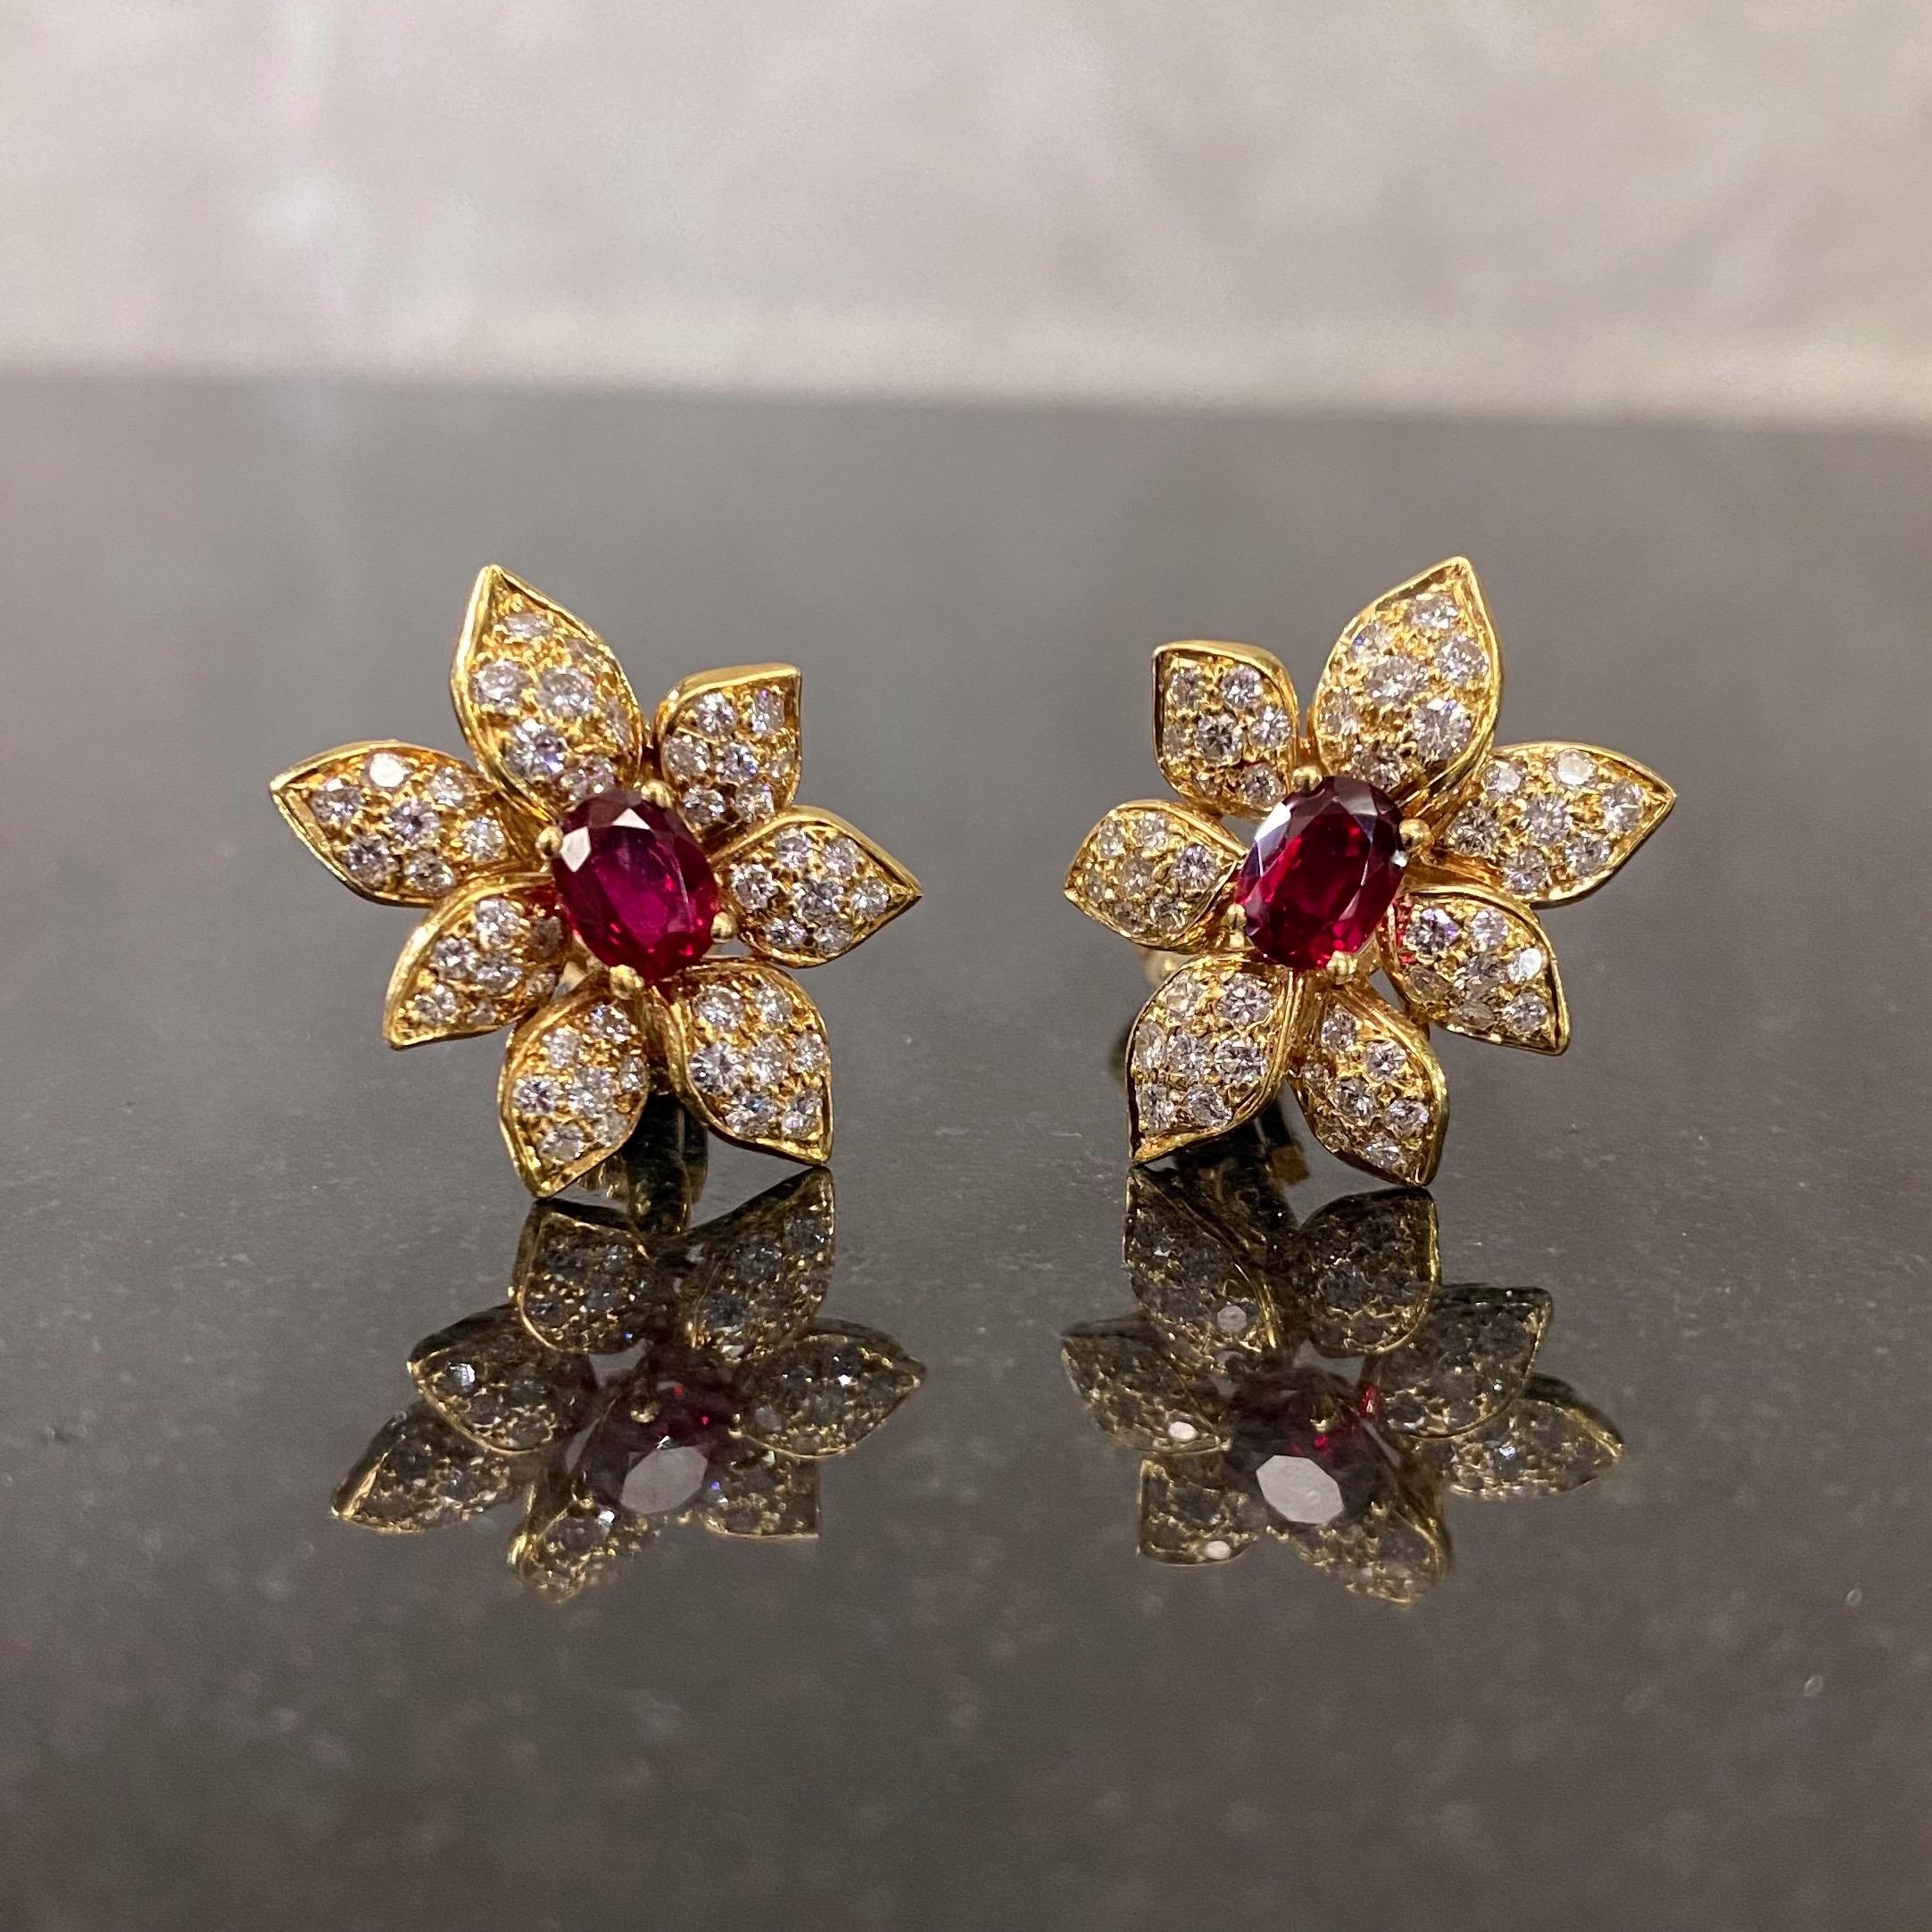 A pair of oval mixed-cut ruby and round brilliant-cut diamond floral clip earrings in 18 karat yellow gold, French, 1950s. Each earring is modelled as a stylized lotus flower, with a deep red oval-shaped ruby claw-set to the center, the seven petals